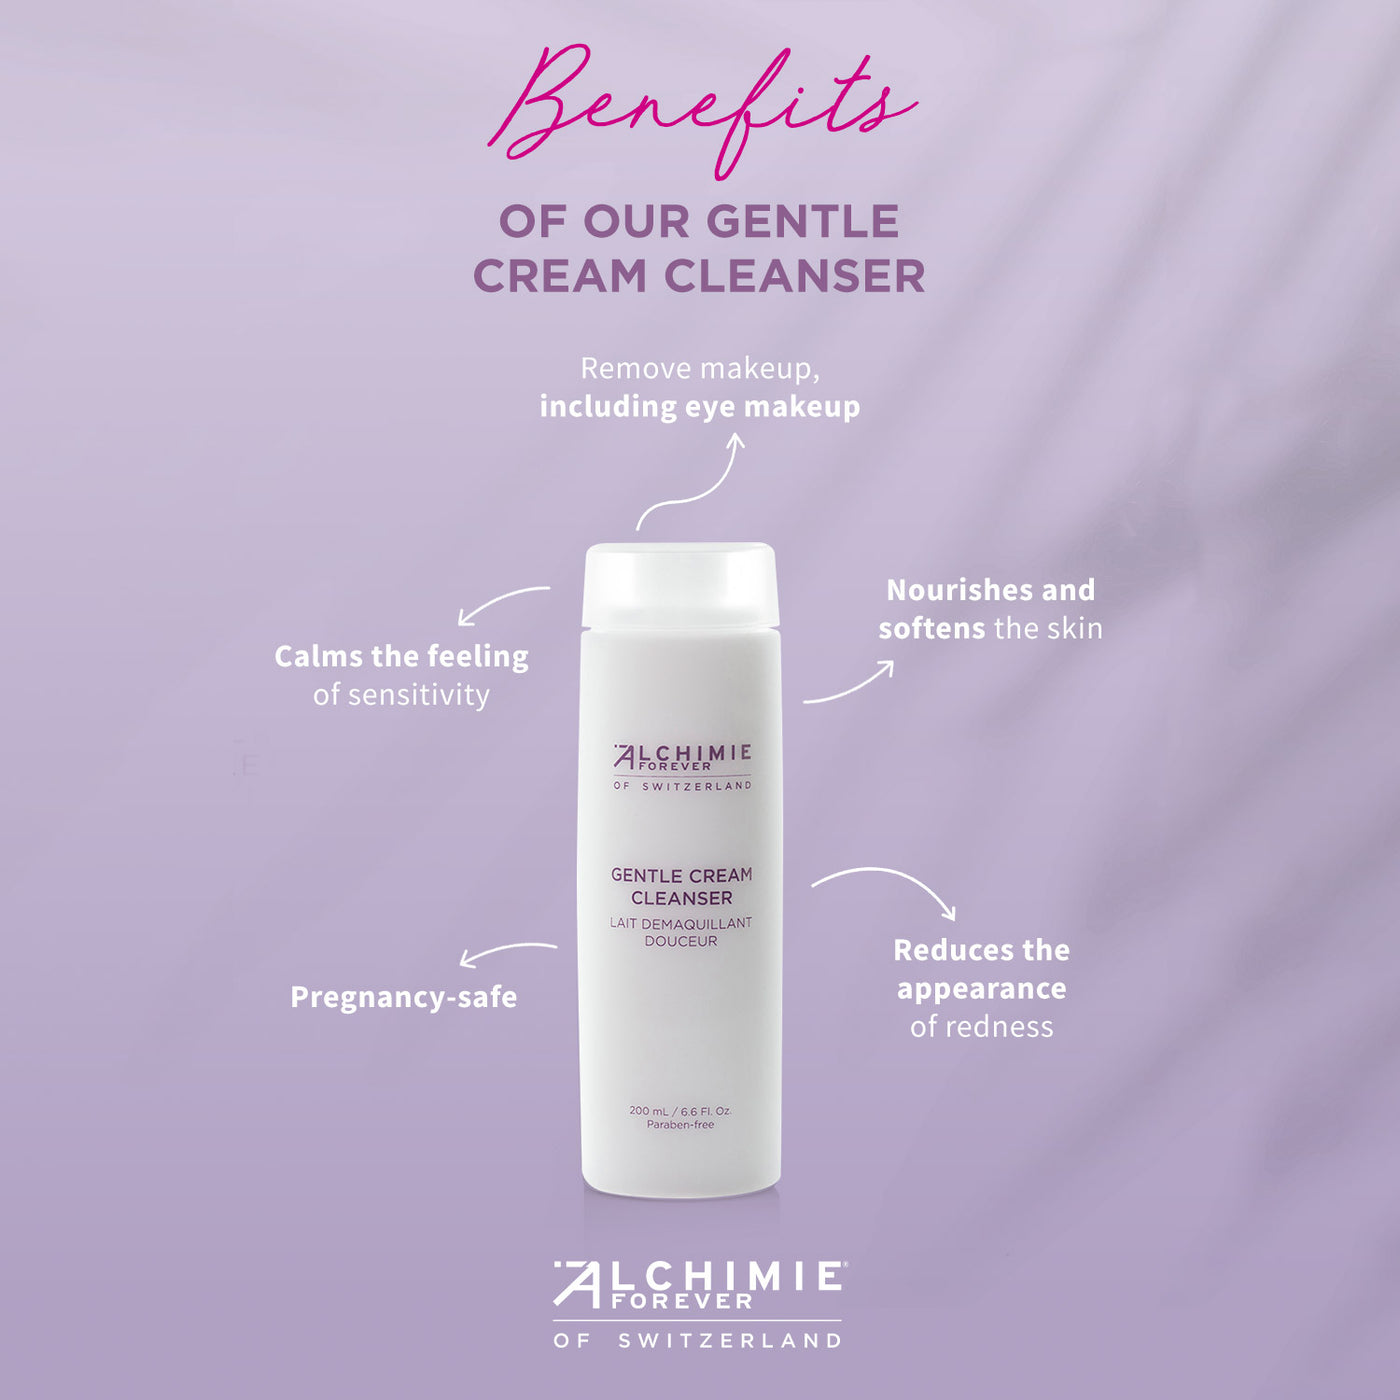 Gentle Cream Cleanser Benefits.  Removes makeup, nourishes and softens the skin, reduces the appearance of redness, calms the skin, pregnancy safe.